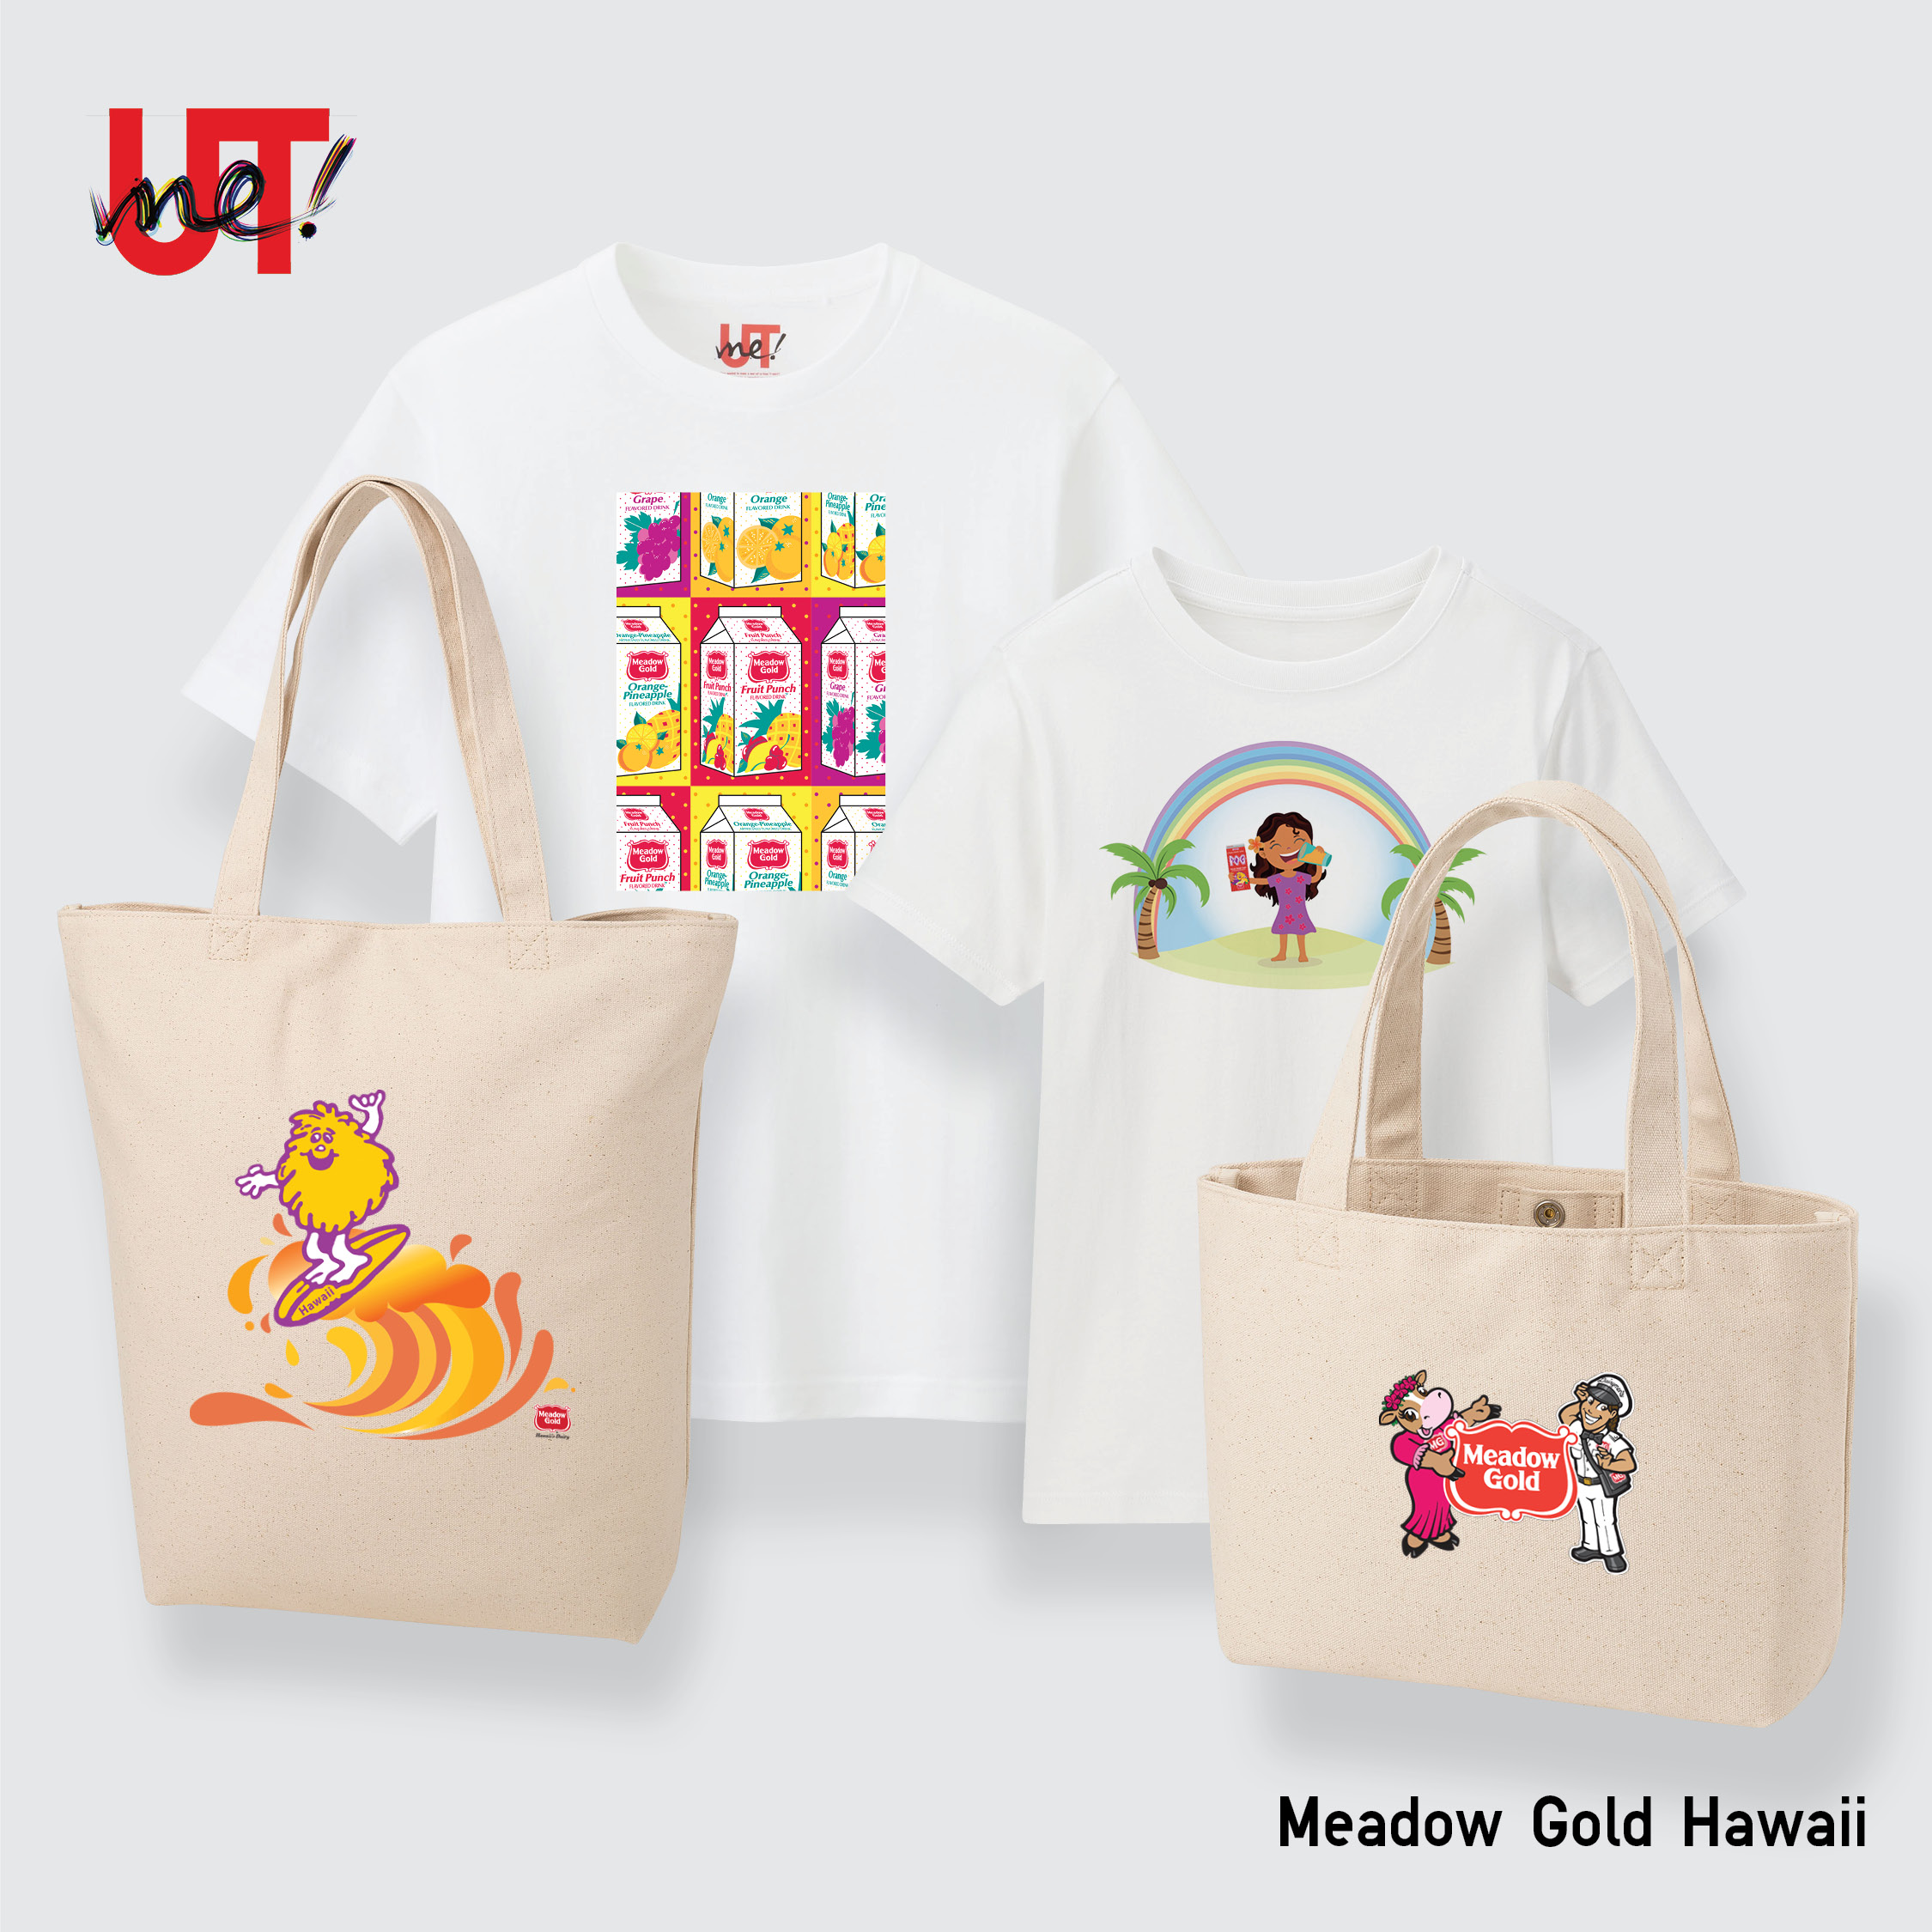 "Together in Hawaii" Collection from Uniqlo